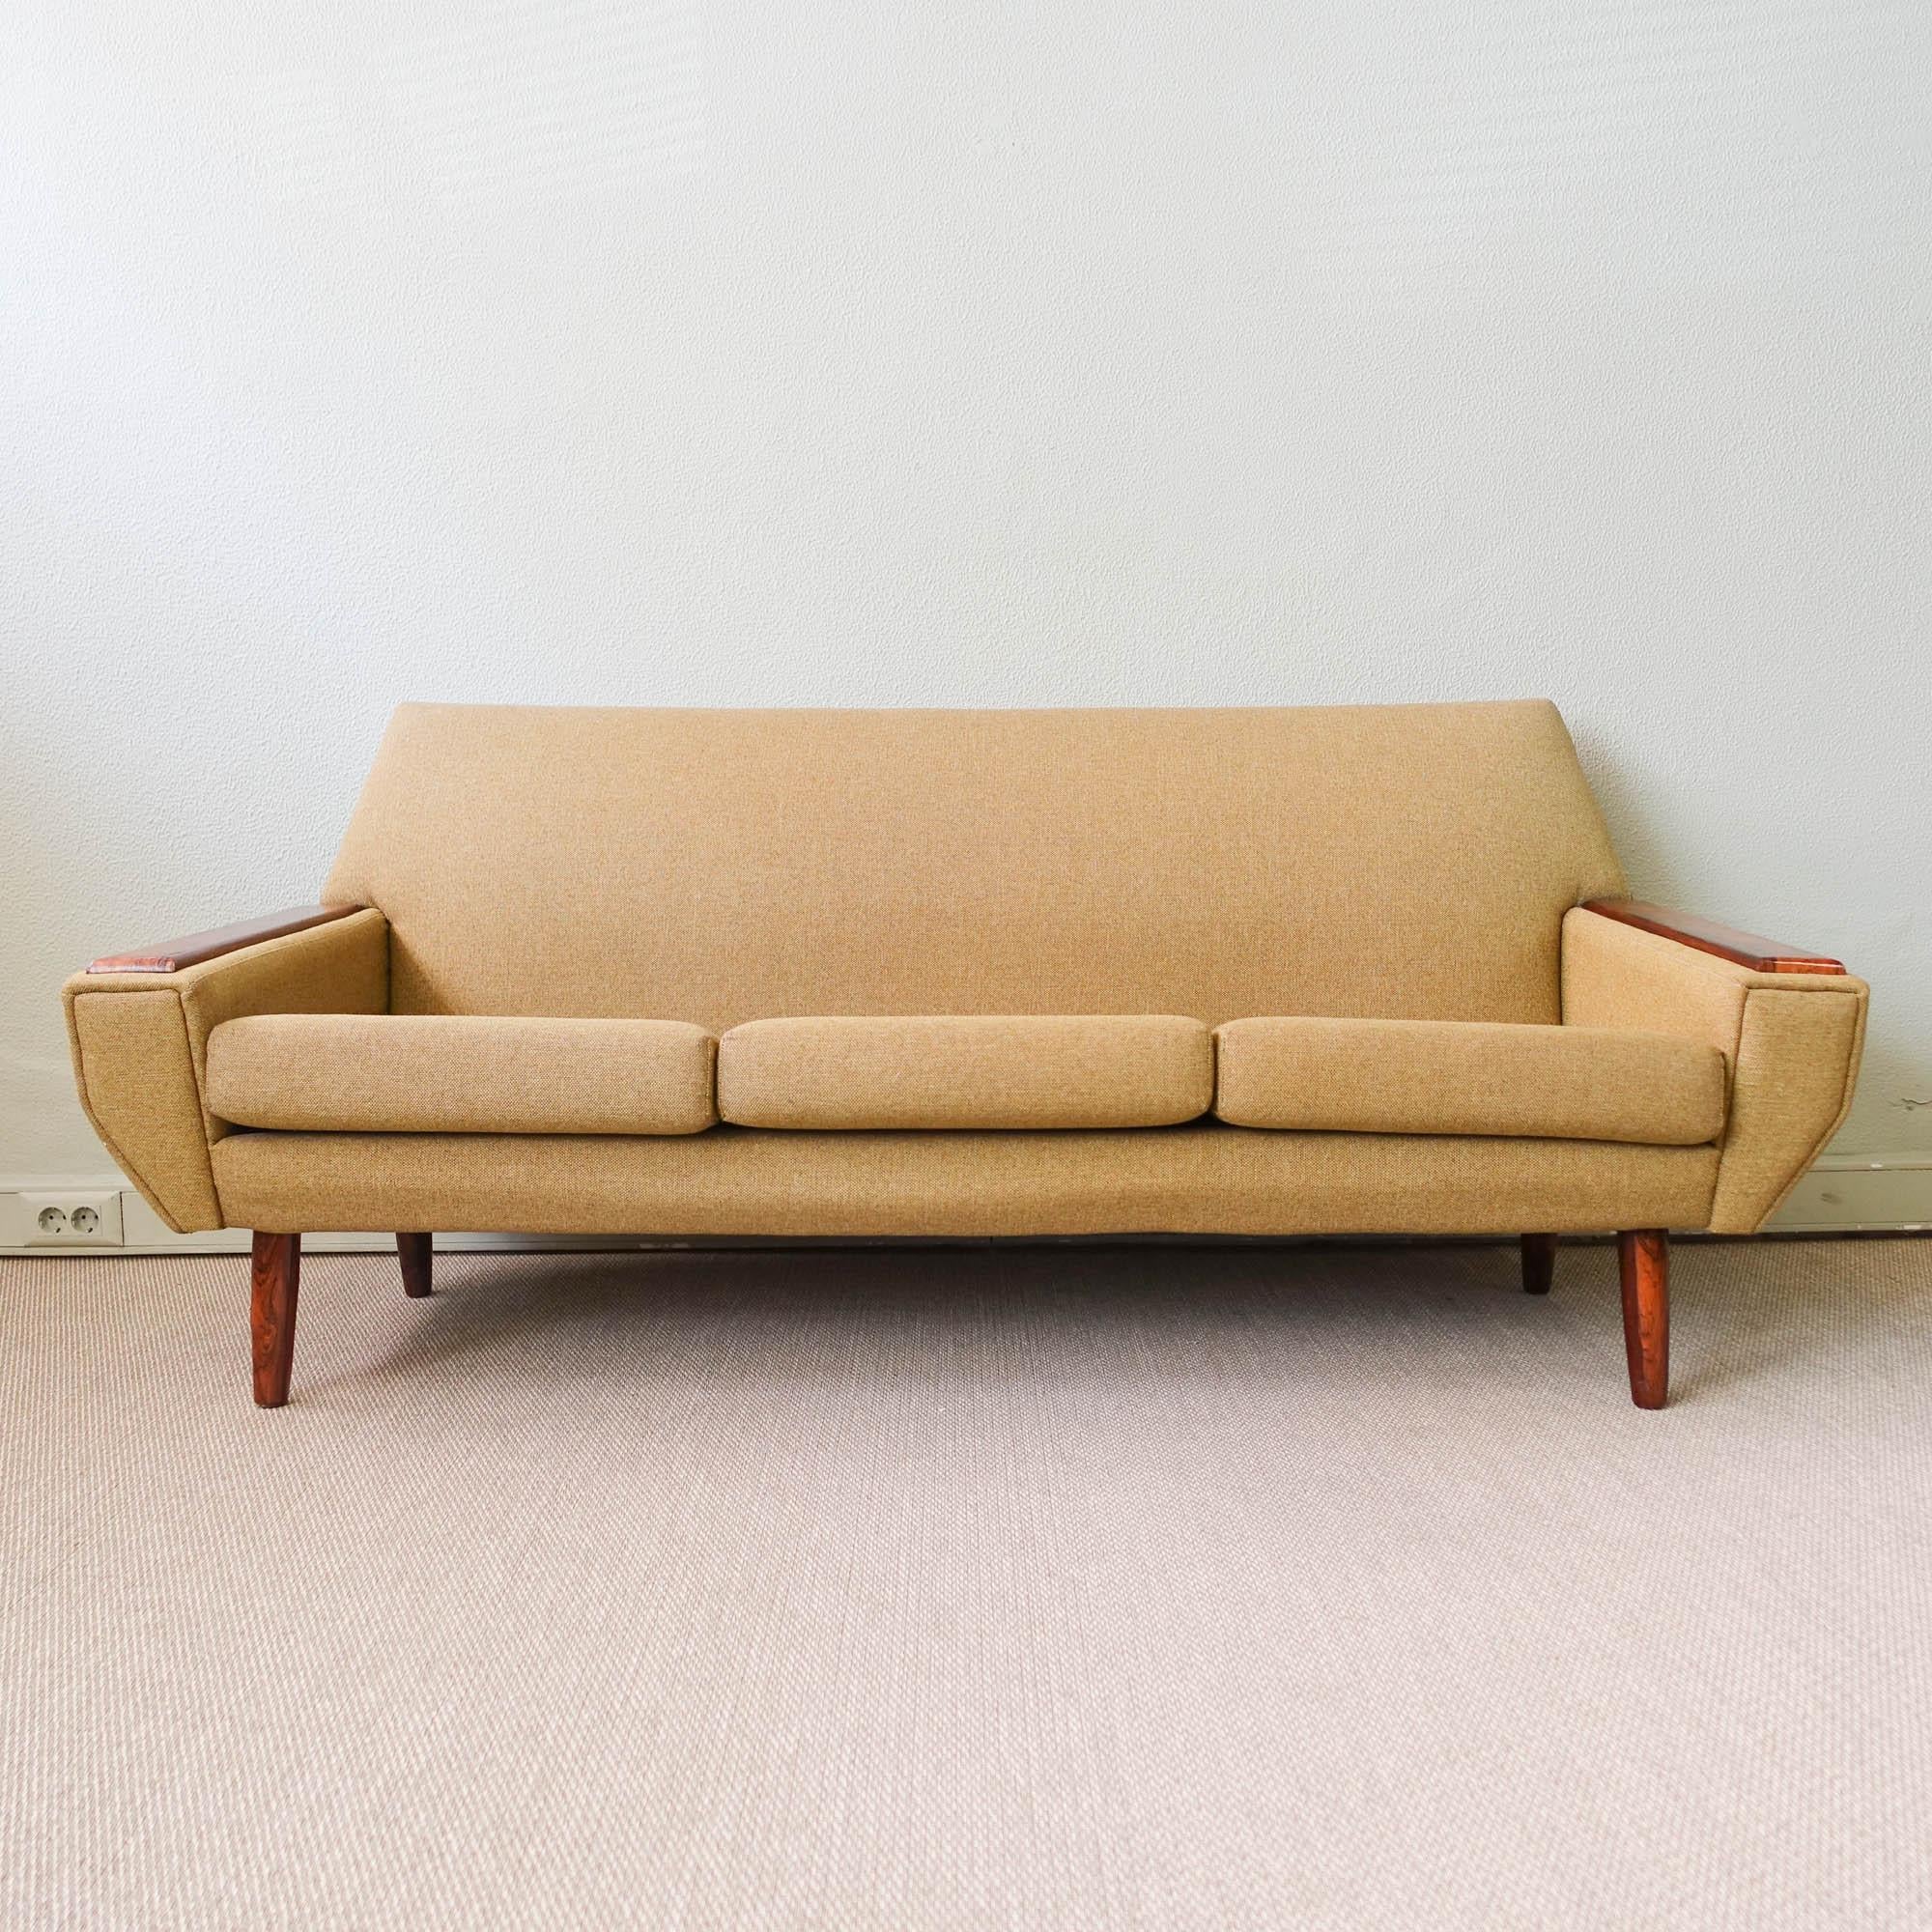 This sofa was designed and produced in Denmark during the 1960's. It is a three seater sofa has with an unique contoured shape, and features exotic wood armrests and feet. The green fabric is in good vintage condition, with some marks related with